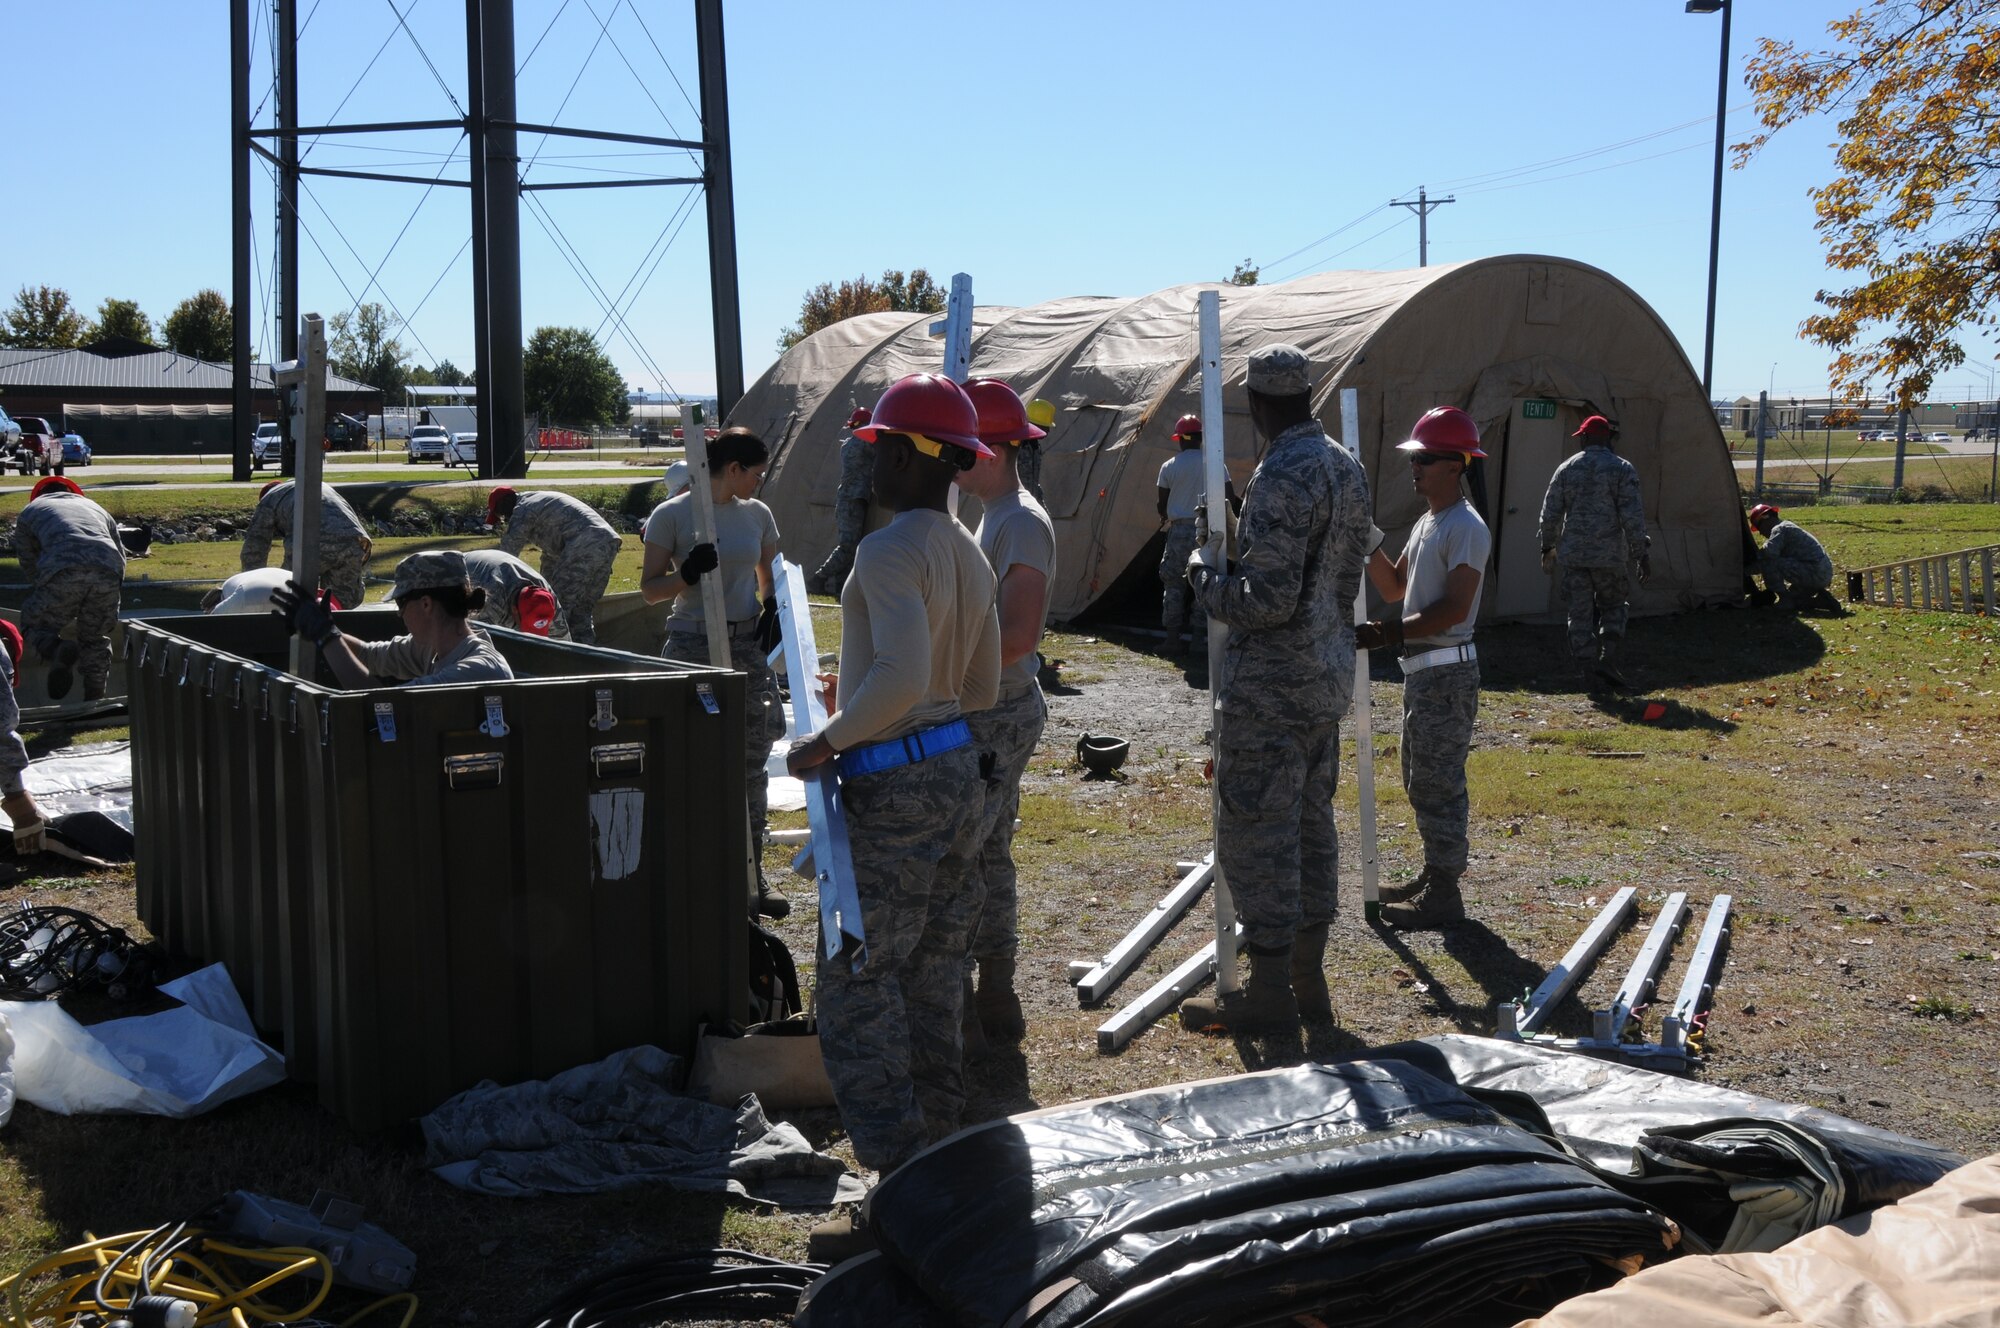 Members of the 567th Rapid Engineers Deployable Heavy Operations Repair Squadron Engineers (RED HORSE) Squadron (RHS) take down tents that were erected at Ebbing Air National Guard Base, Fort Smith, Ark., Nov. 6, 2014. The 567th RHS ventured to Ebbing Air National Guard Base to retrain on its RED HORSE capabilities with the 188th Civil Engineering Squadron. The 567th is an Air Force Reserve unit based at Seymour Johnson Air Force Base, N.C. (U.S. Air National Guard photo by Airman 1st Class Cody Martin/Released)